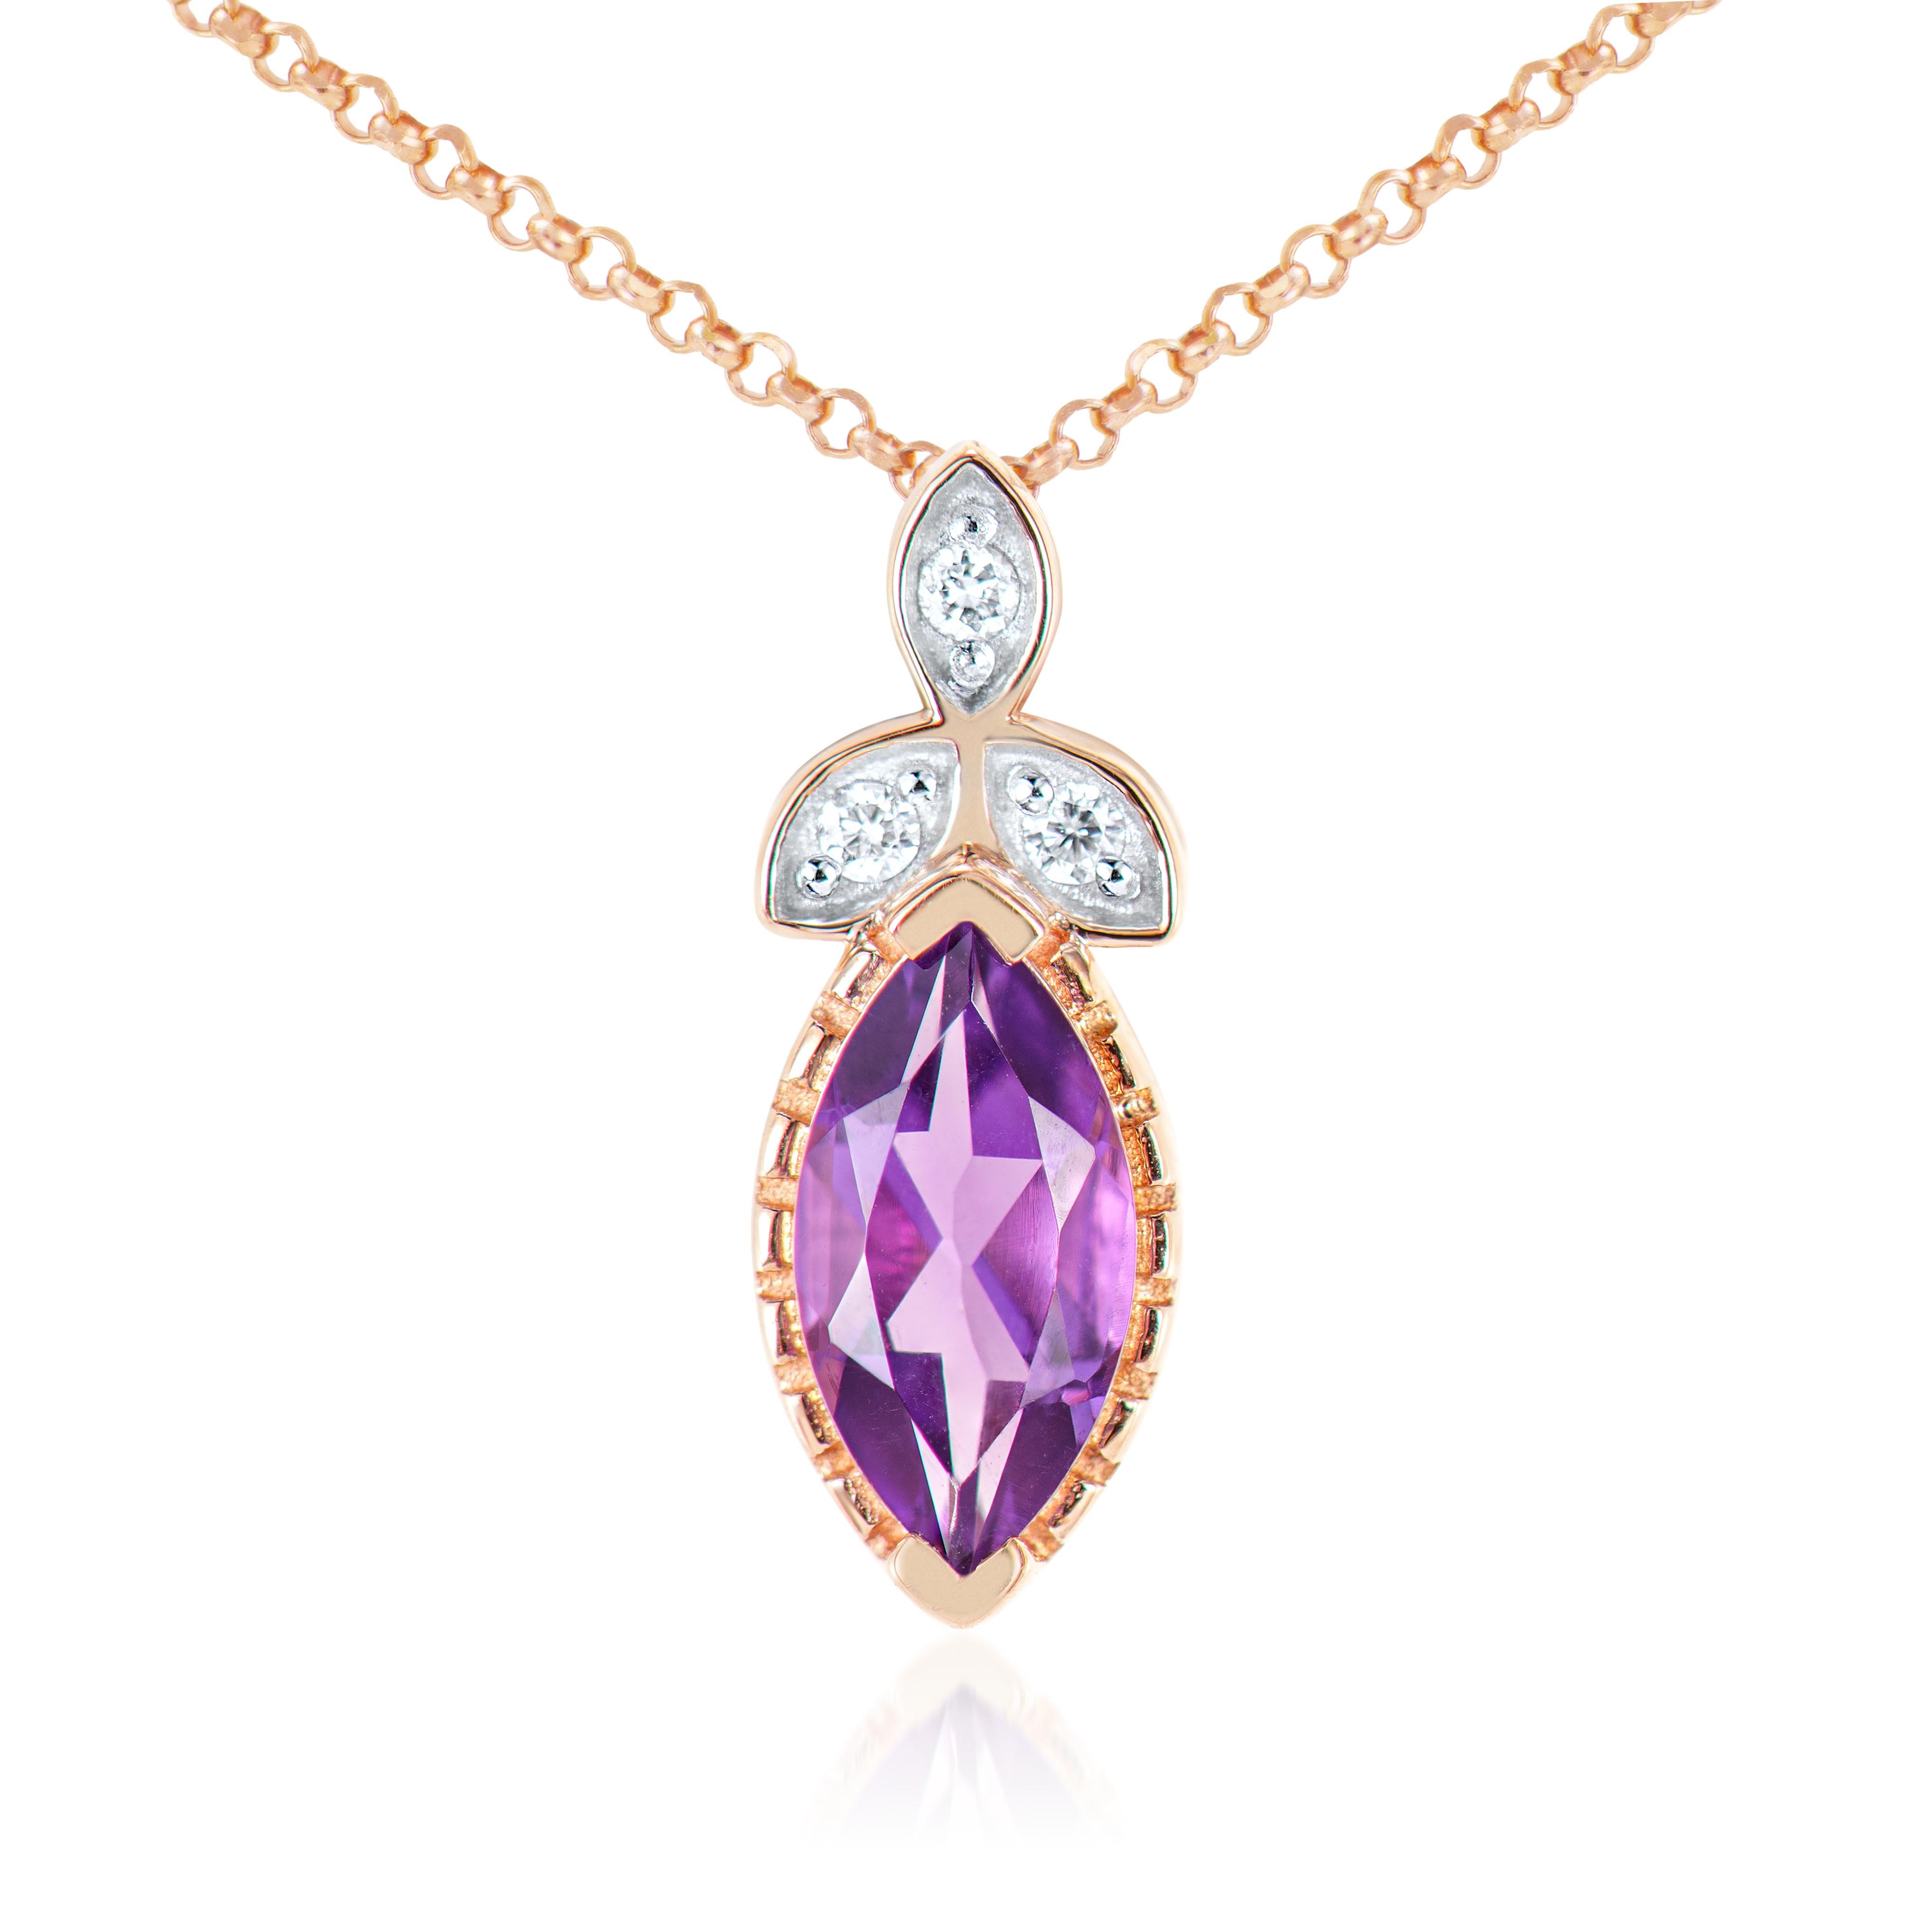 Marquise Cut 0.45 Carat Amethyst Pendant in 14Karat Rose Gold with White Diamond. For Sale